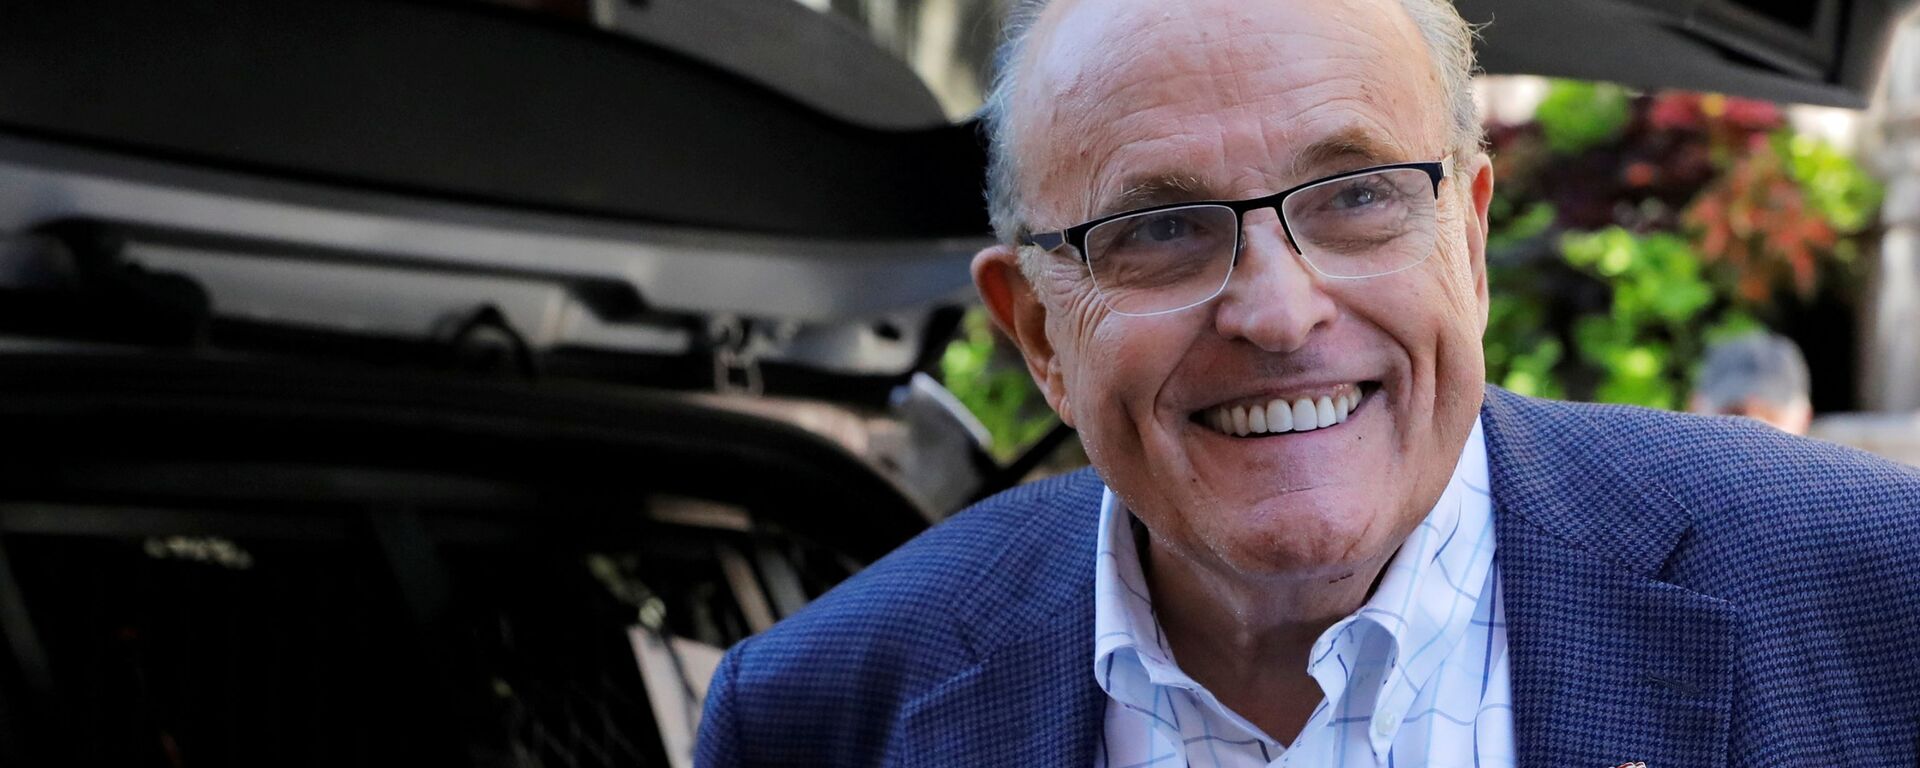 Former New York City Mayor Rudy Giuliani is seen outside his apartment building after his law license was suspended in Manhattan in New York City, New York, U.S., June 24, 2021. - Sputnik International, 1920, 16.02.2022